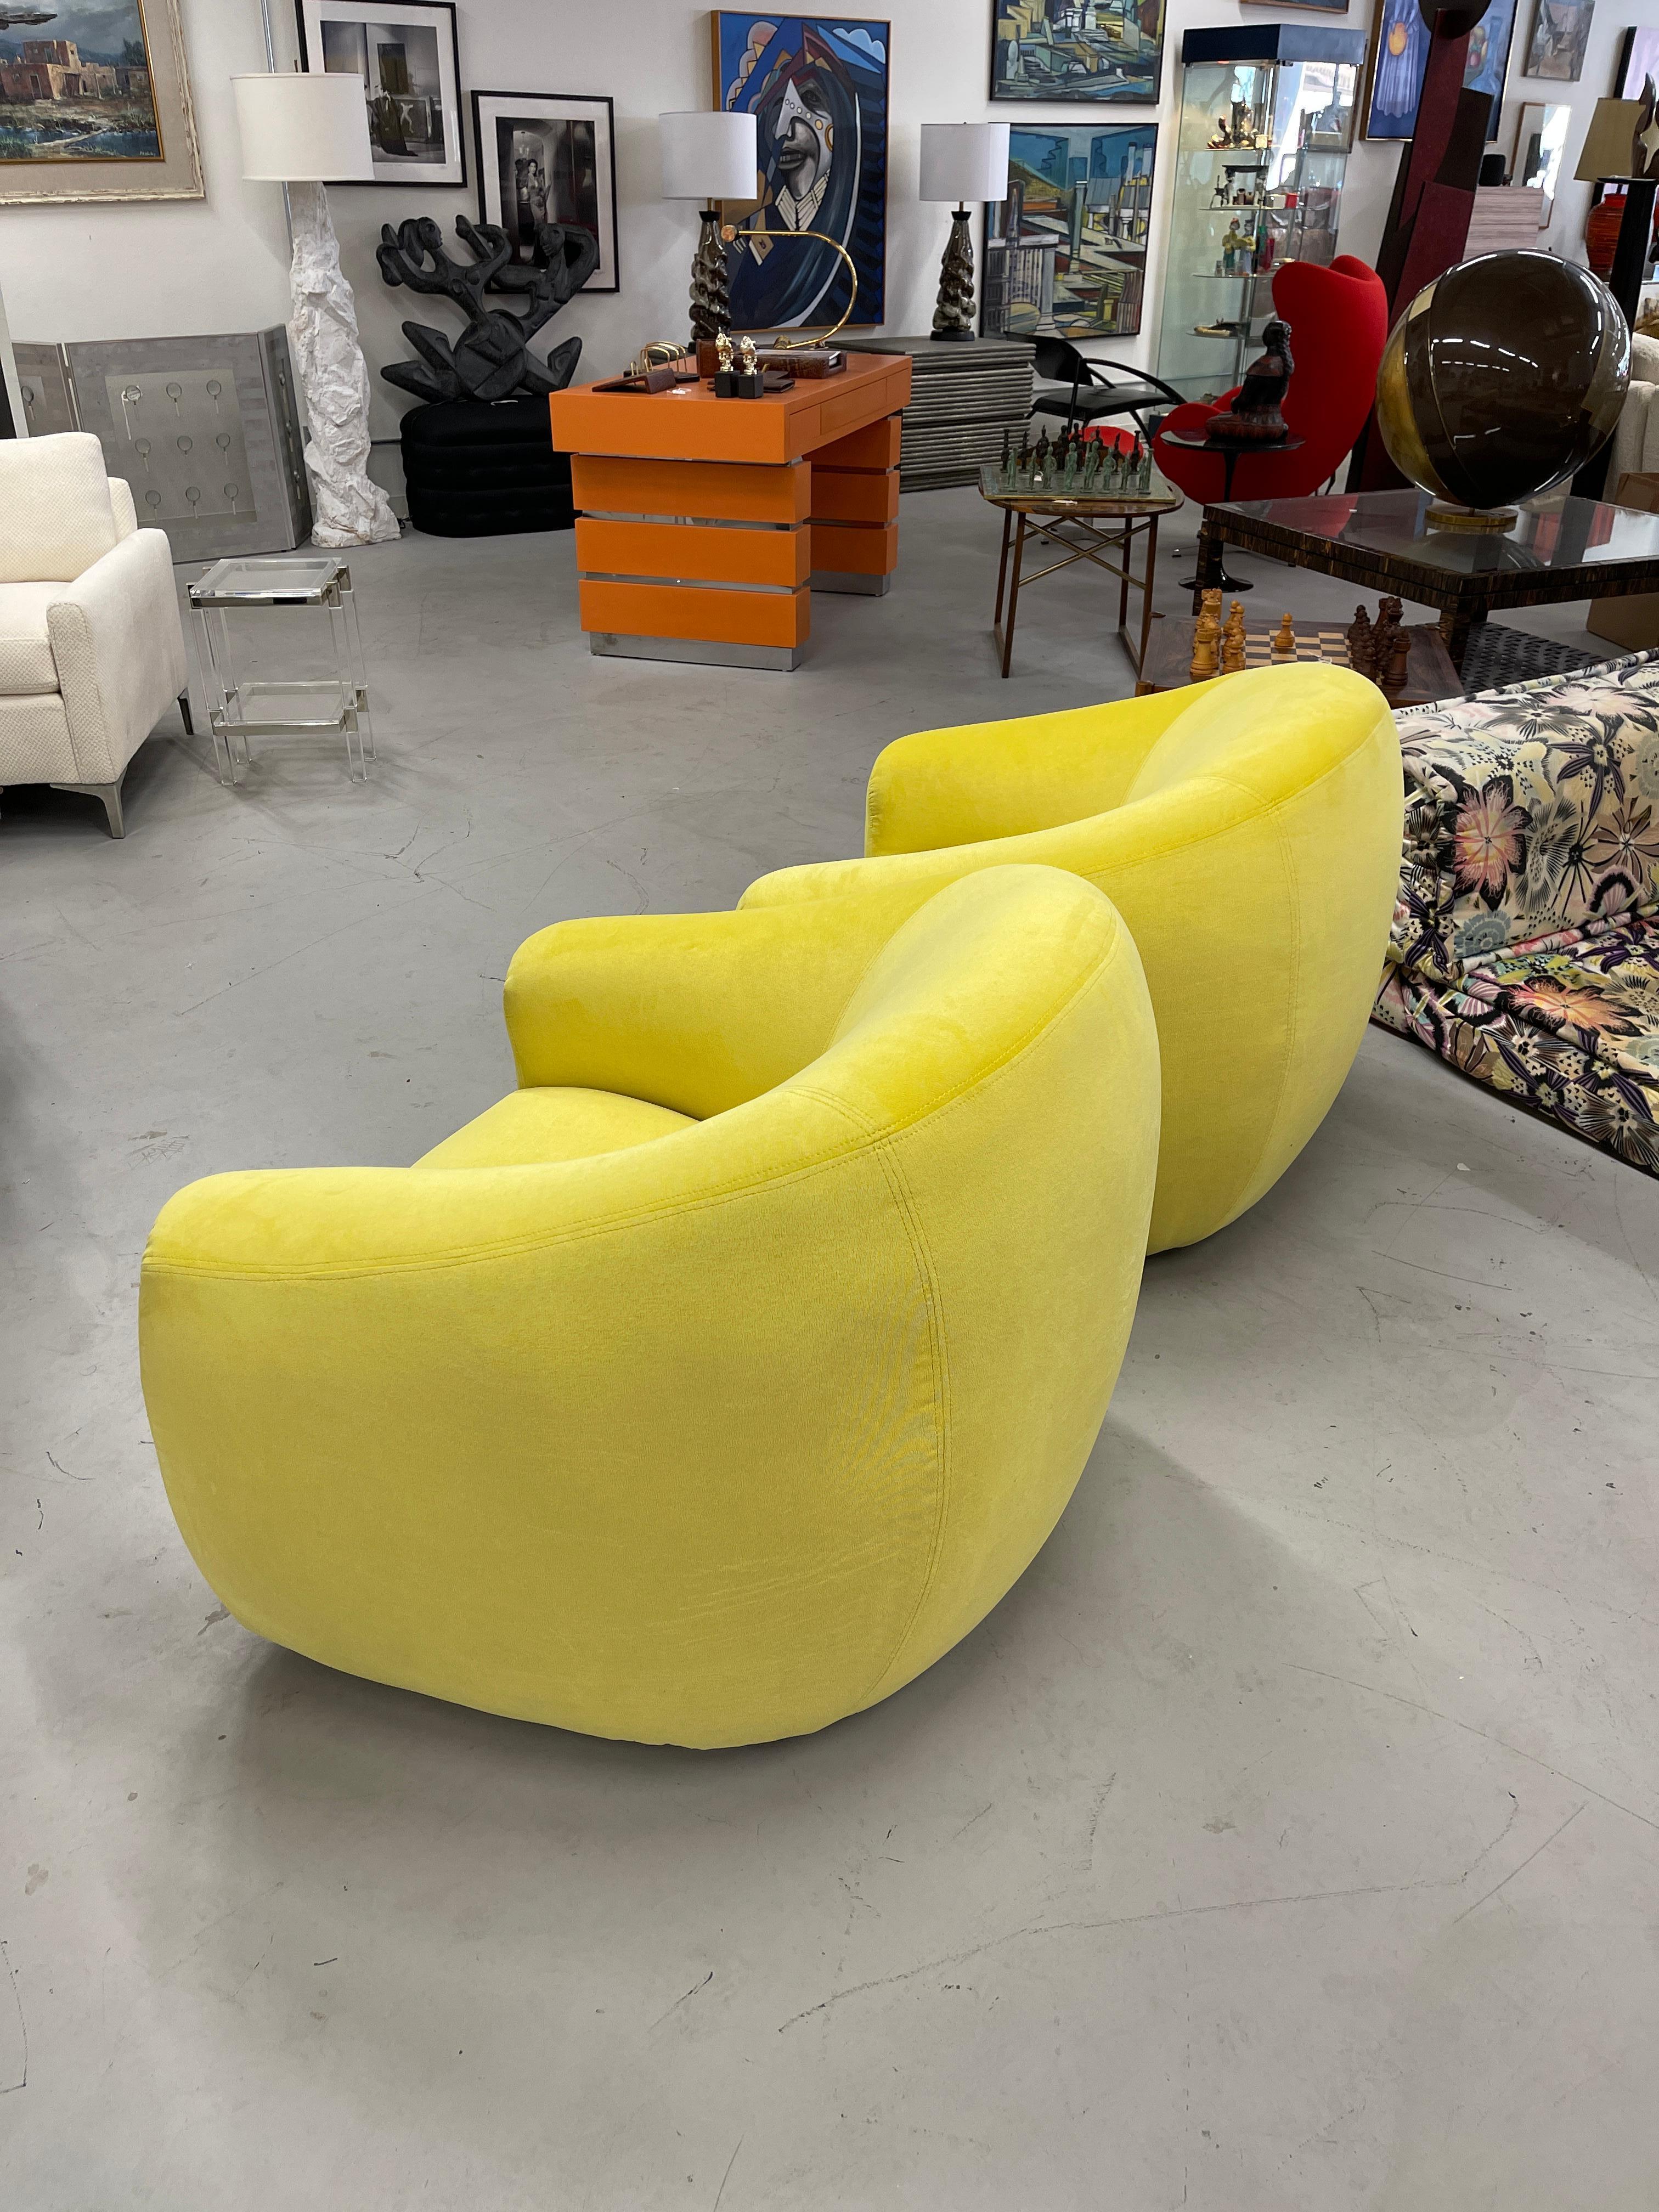 Hand-Crafted A Rudin Swivel Chairs in Limon Kravet Fabric